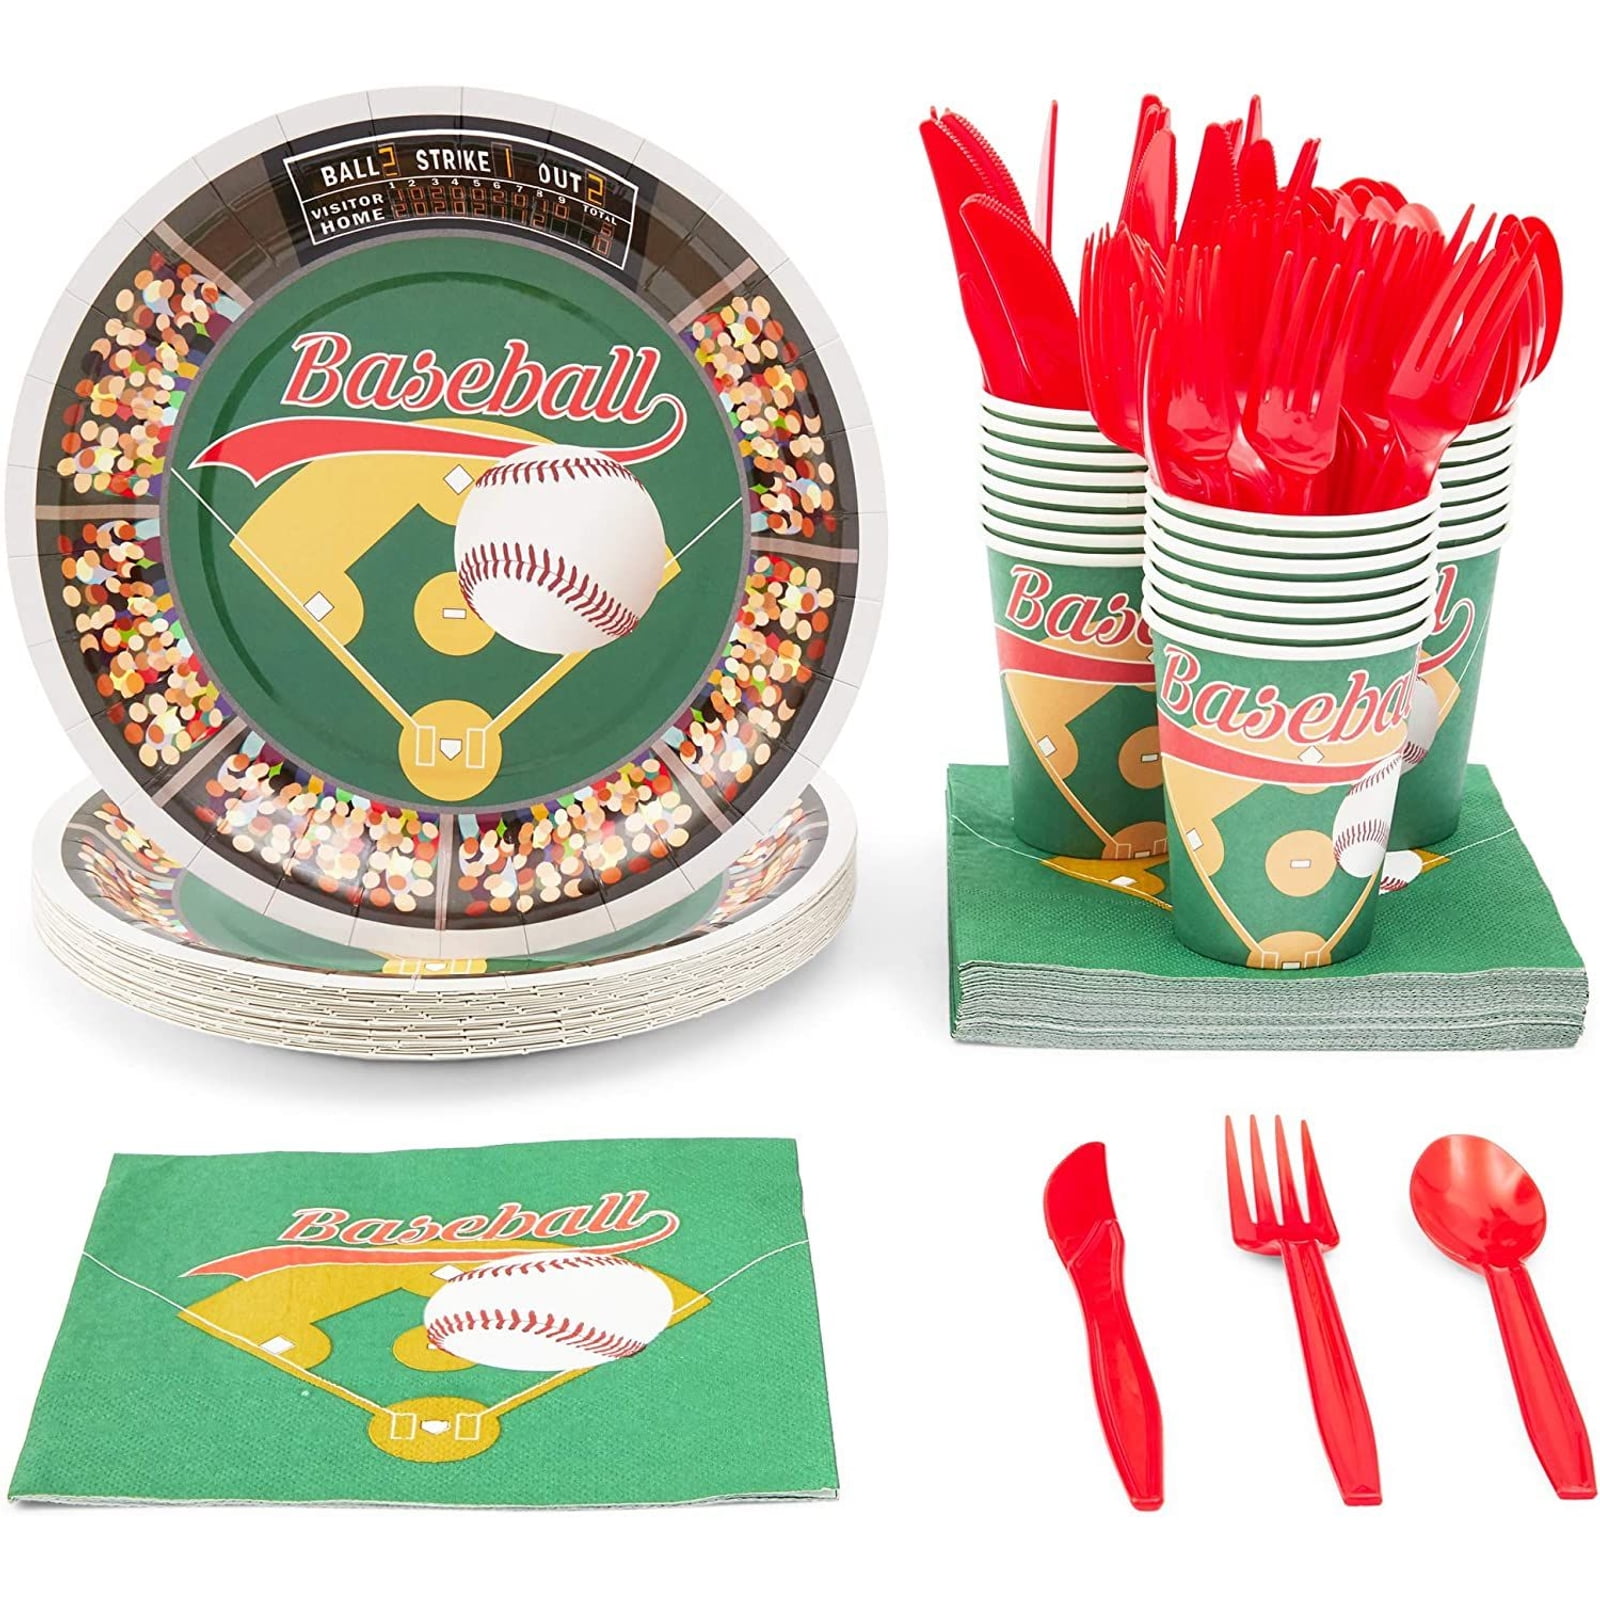 durony 72 Pieces Baseball Theme Party Supplies Include 16 Baseball Napkins 24 Baseball Paper Plates 24 Baseball Party Cups Baseball Party Decorations for Birthday Sports Party Supplies 